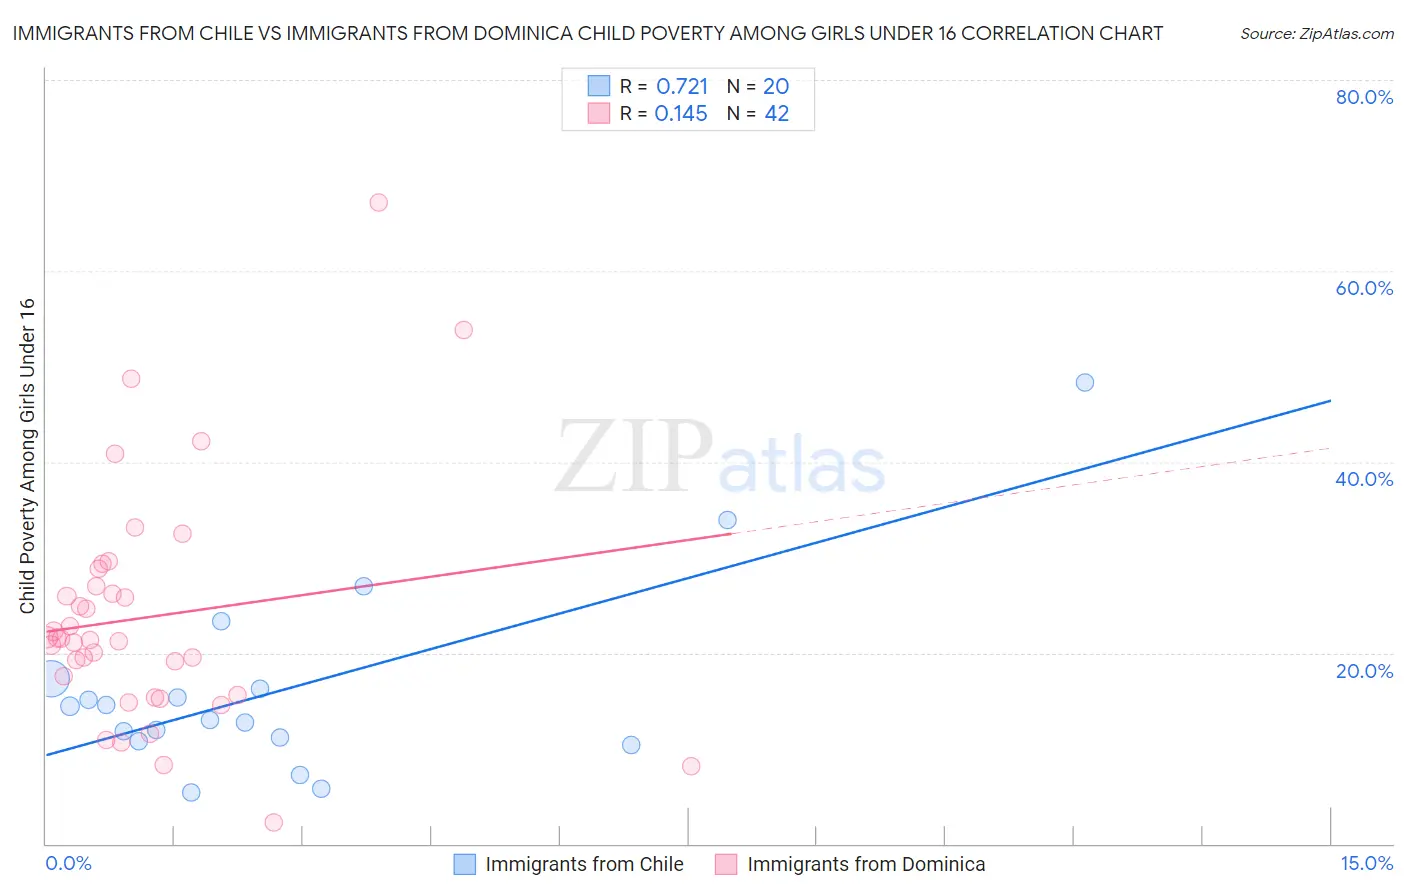 Immigrants from Chile vs Immigrants from Dominica Child Poverty Among Girls Under 16